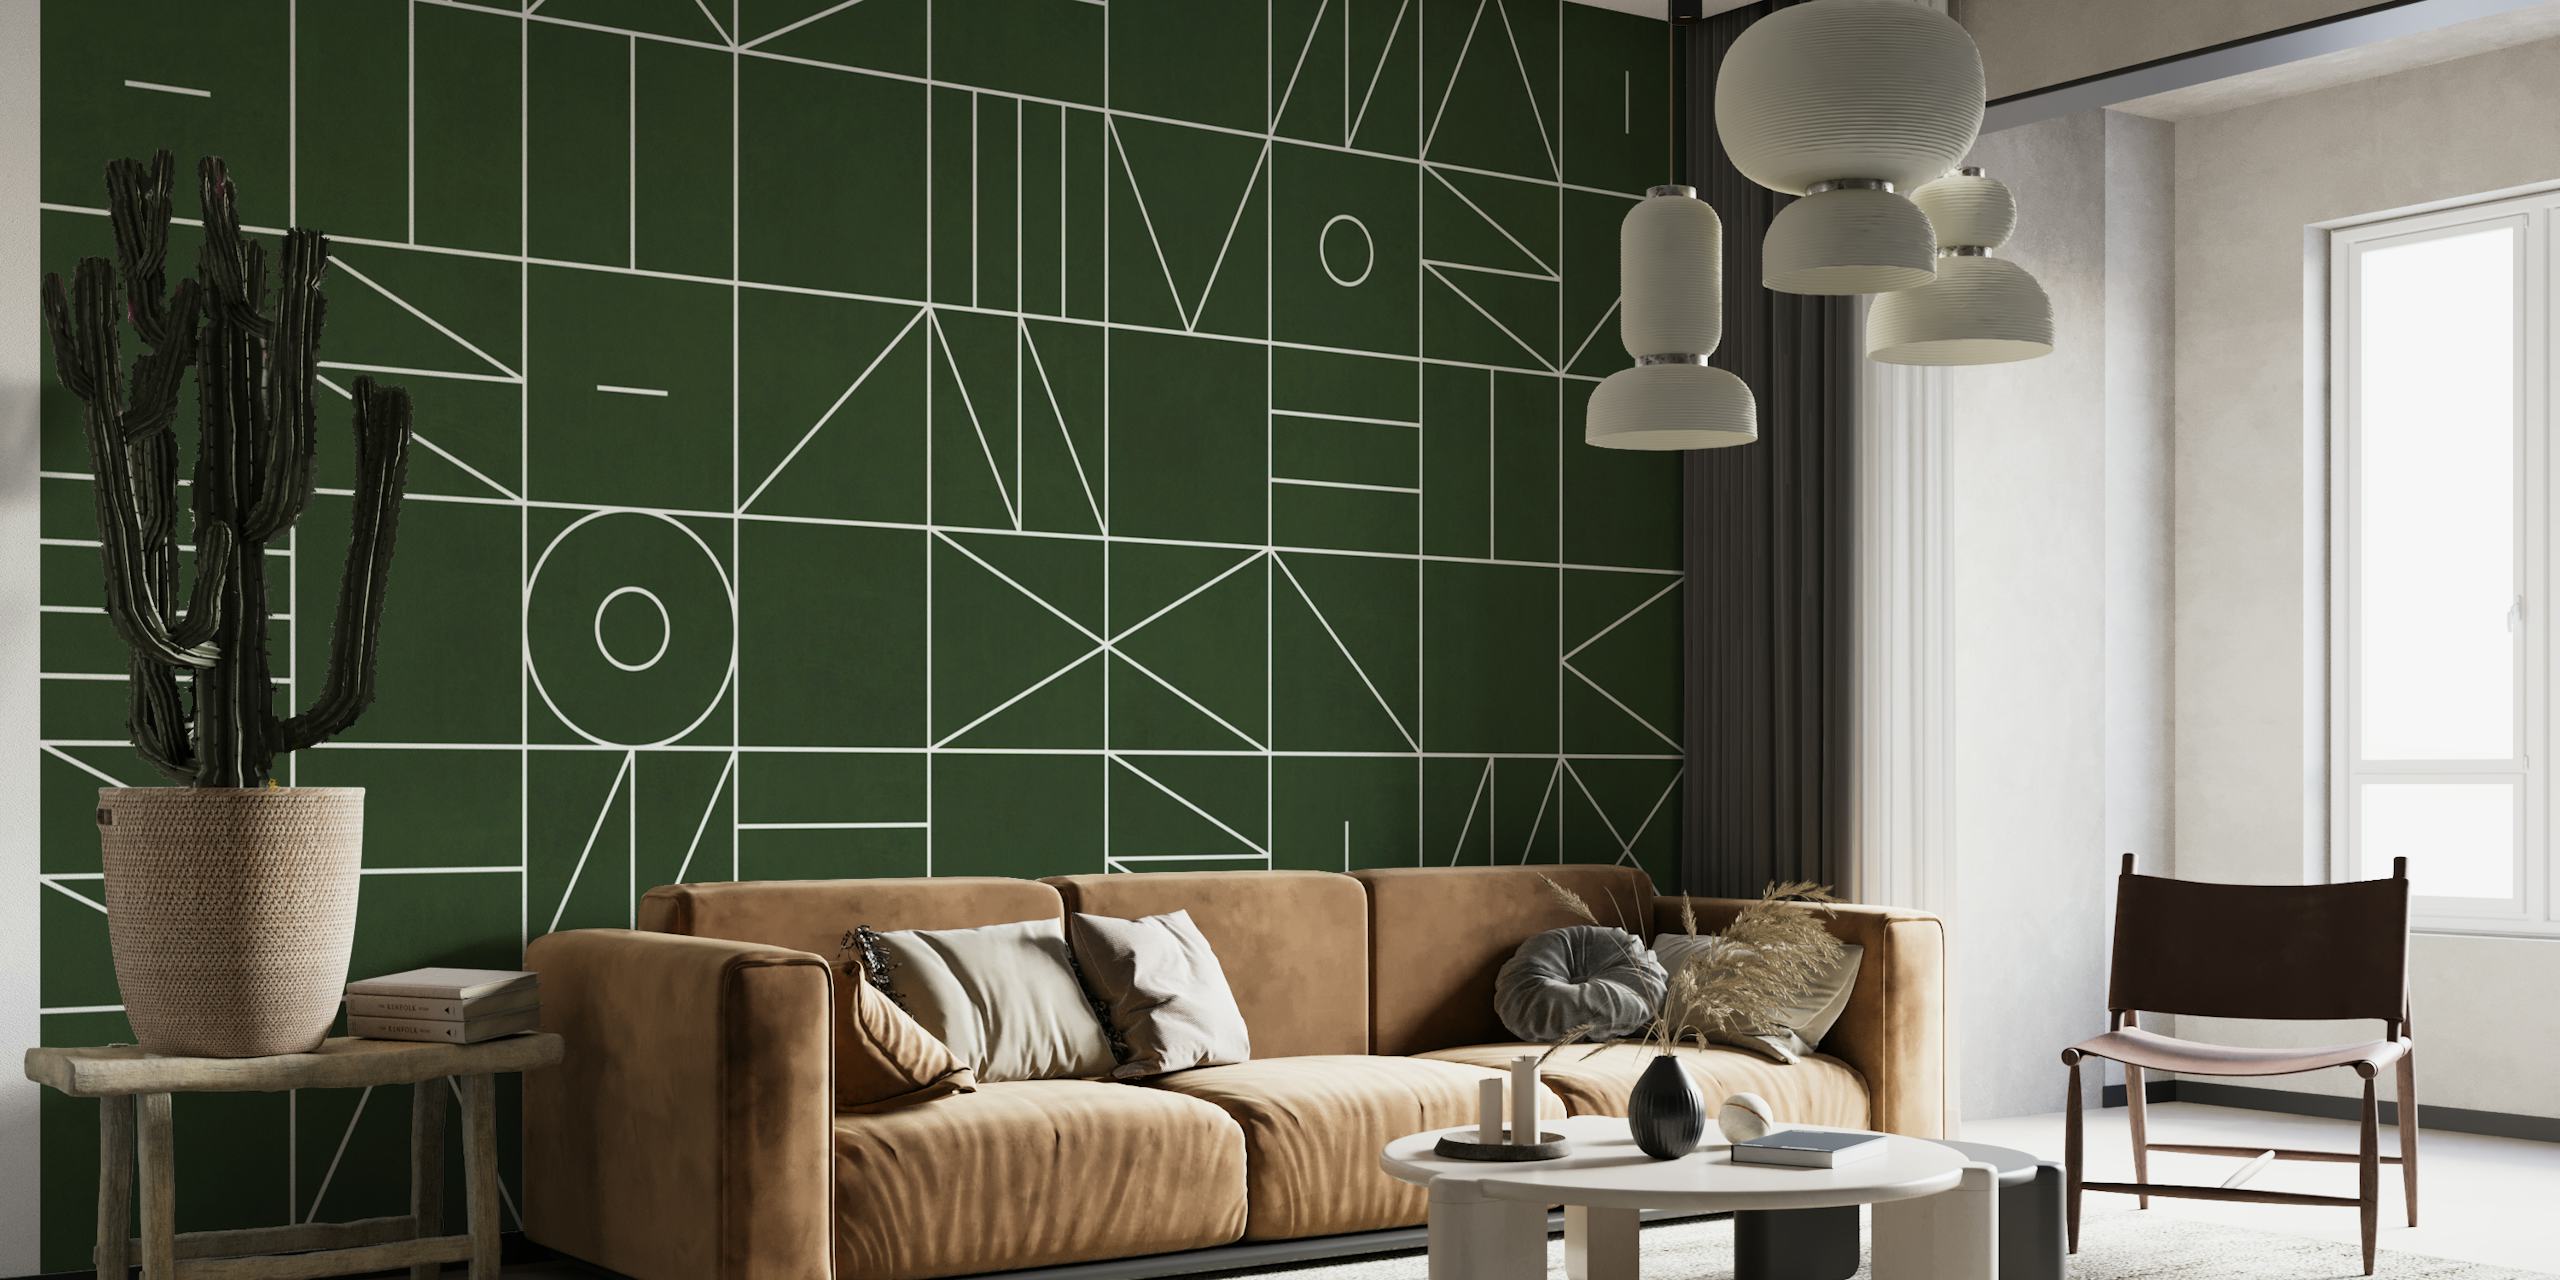 Geometric pattern wall mural with a variety of shapes and lines on a dark backdrop